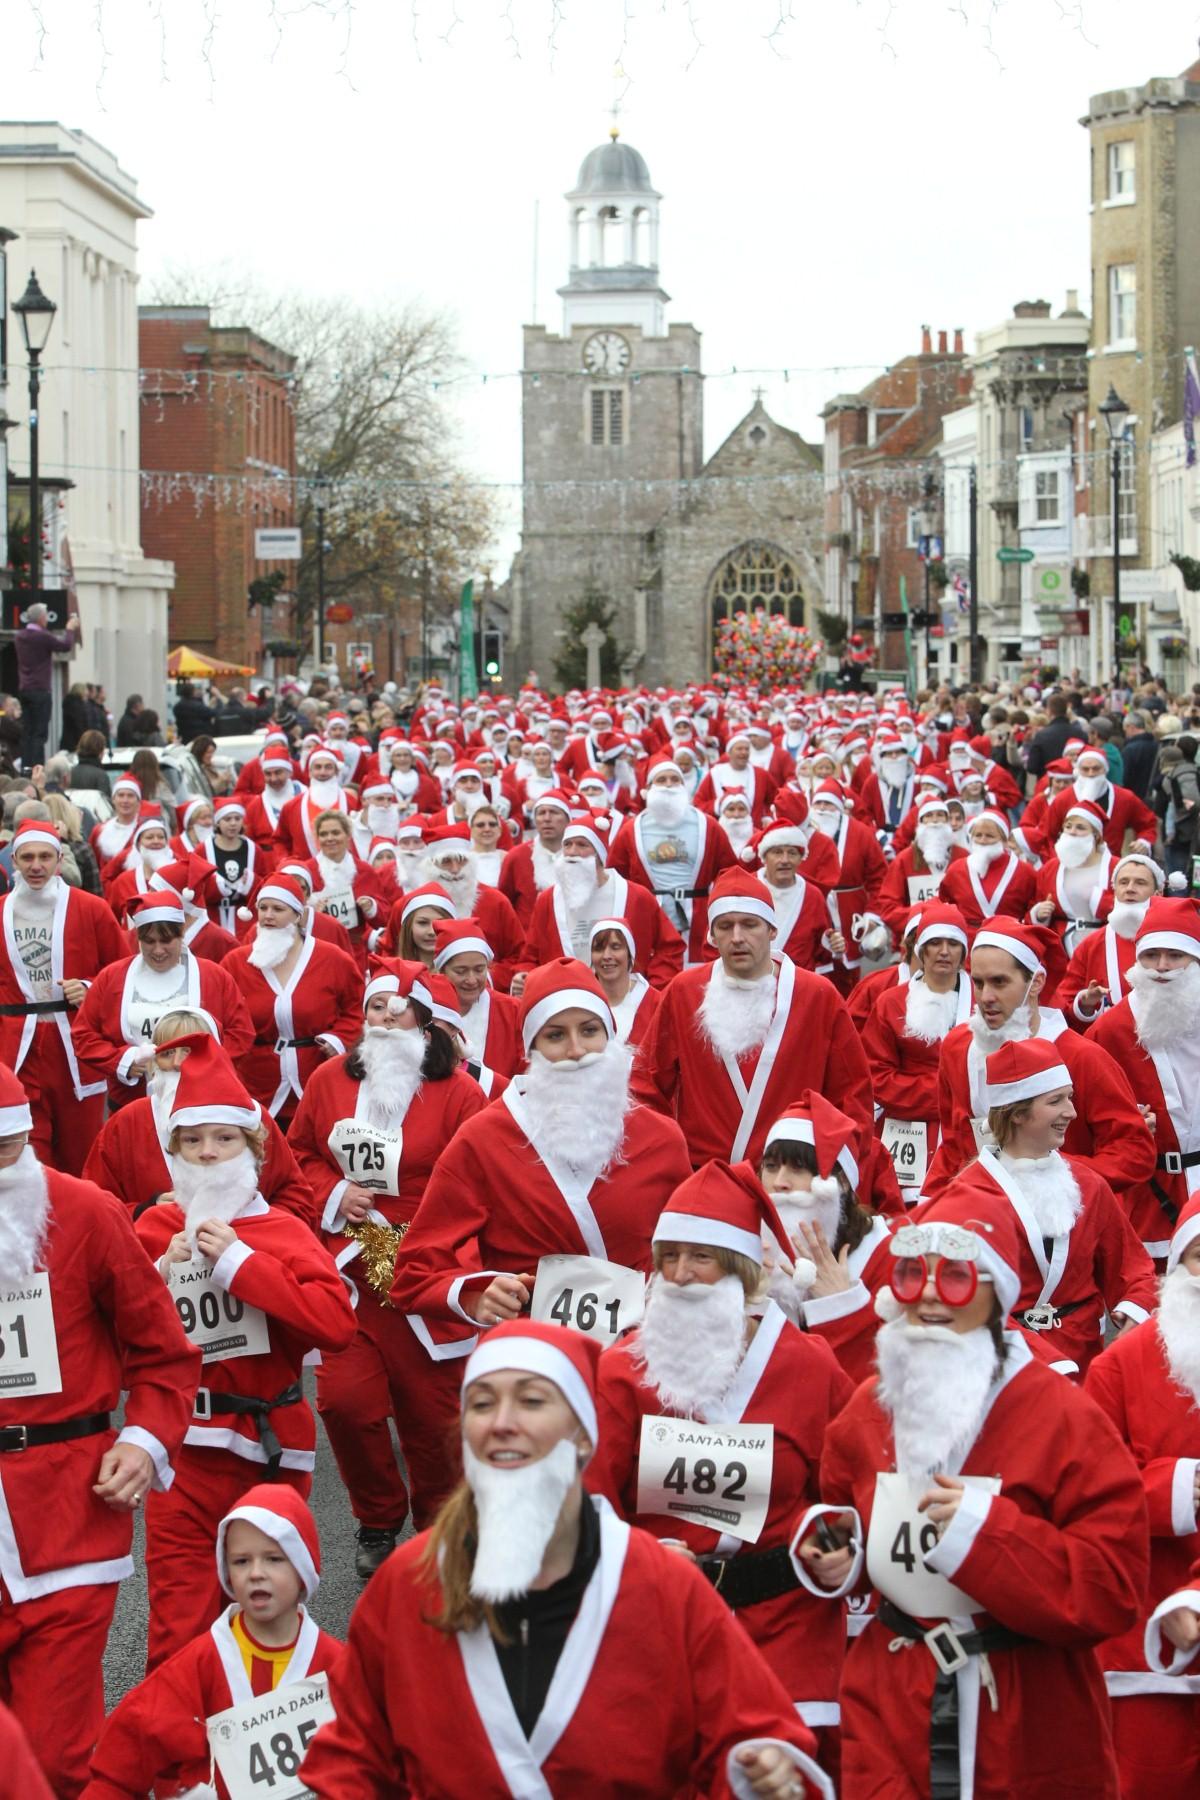 The Year in Pictures - 2013 - Lymington Santa Dash in aid of Oakhaven Hospice. December 8, 2013.